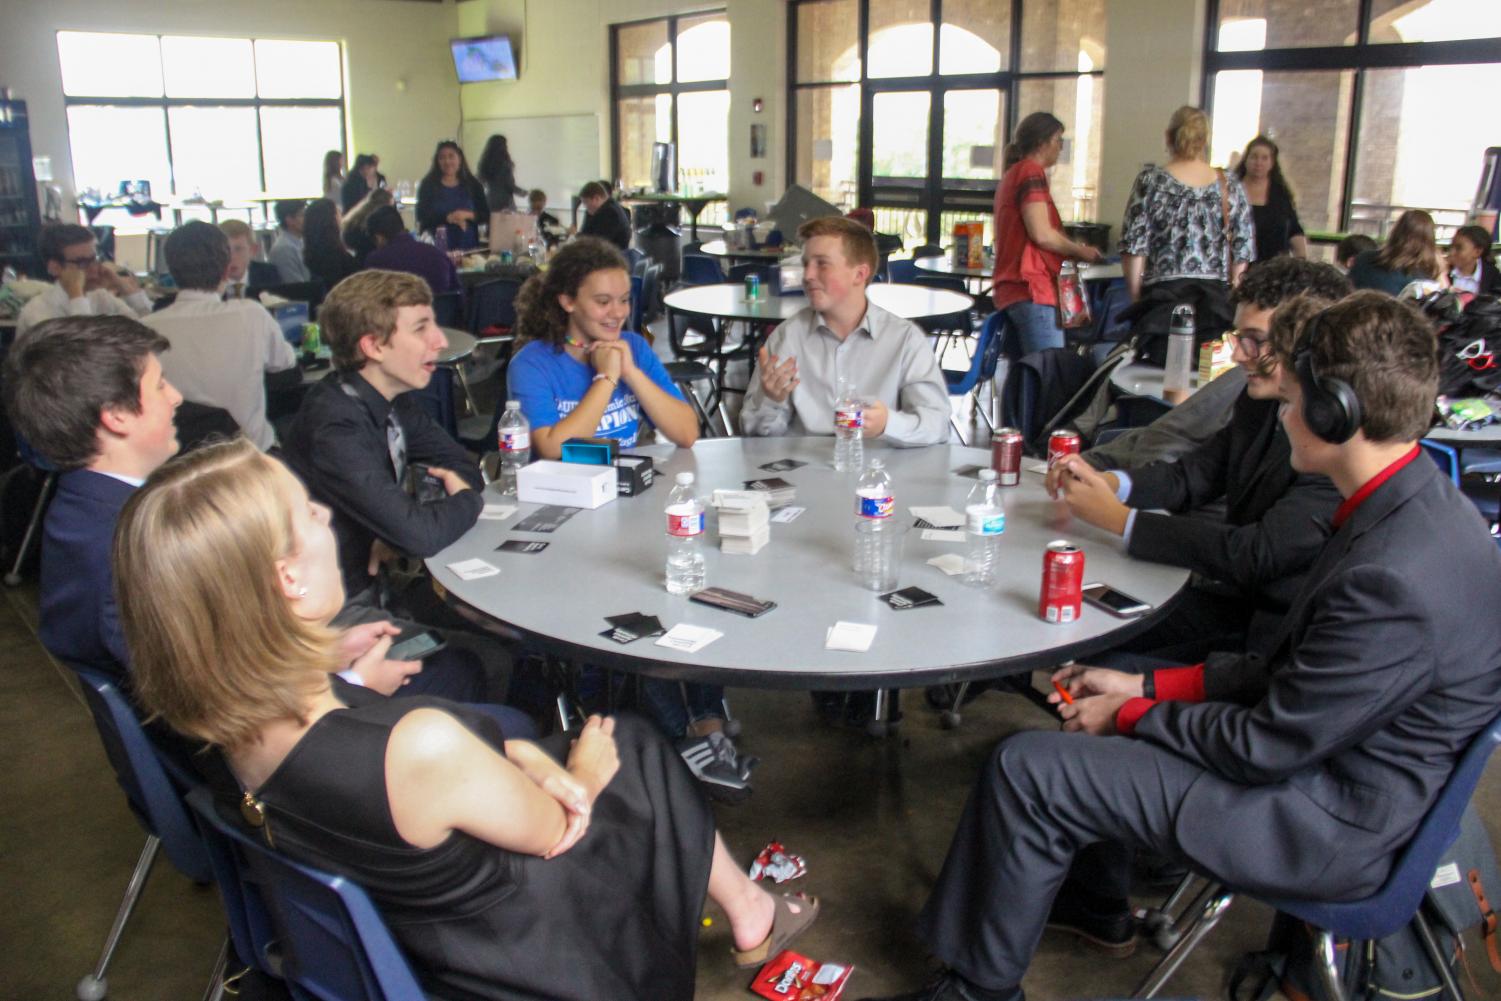 Speech and debate students enjoy a game of cards between rounds at the All Saints tournament. The team won third place sweepstakes at that tournament.